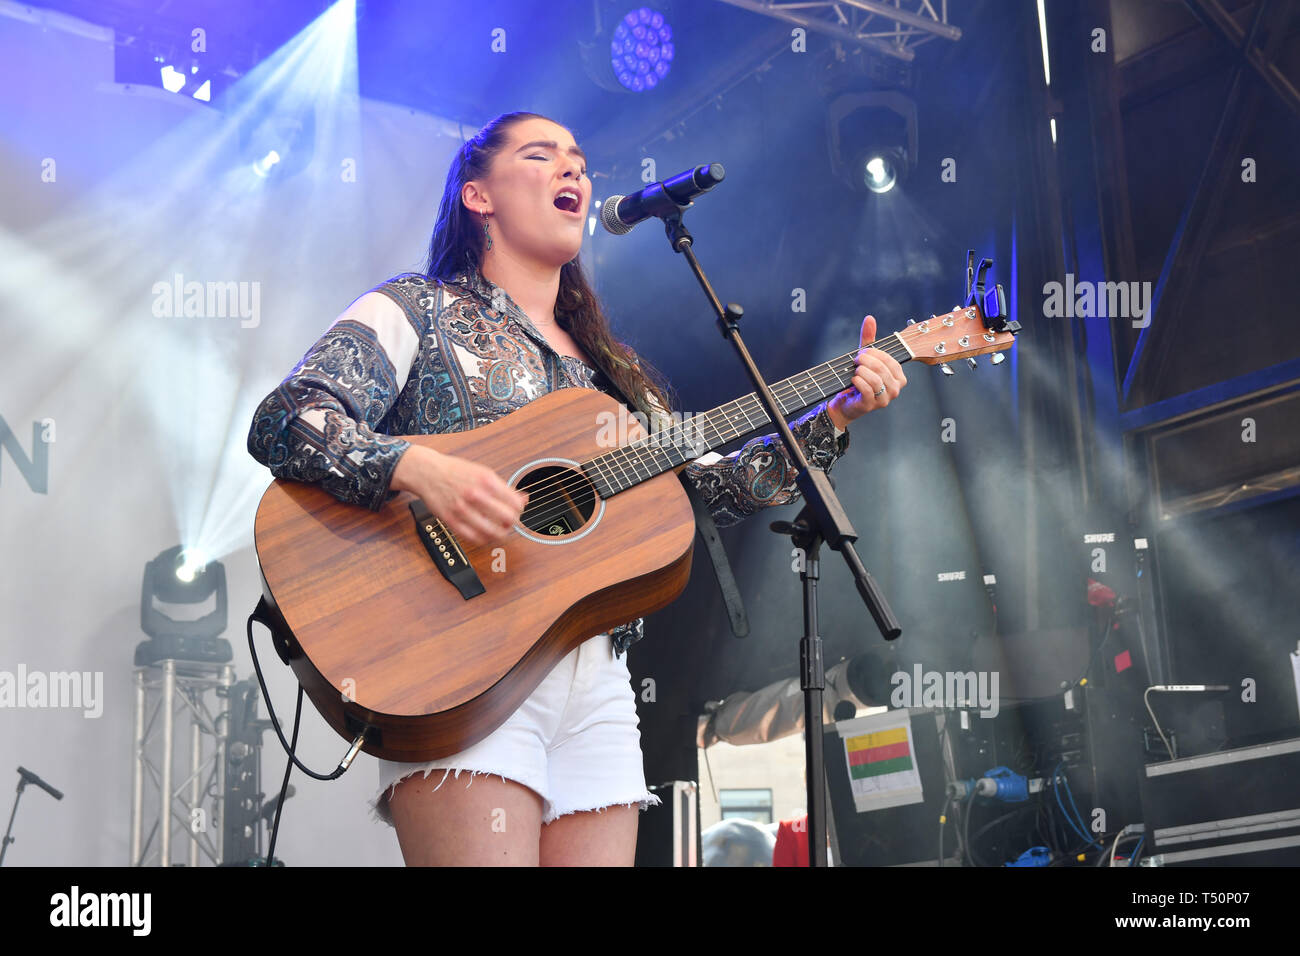 London, UK. 20th April, 2019.Basking in London - Maddie Bowe performs at the Feast of St George to celebrate English culture with music and English food stalls in Trafalgar Square on 20 April 2019, London, UK. Credit: Picture Capital/Alamy Live News Stock Photo